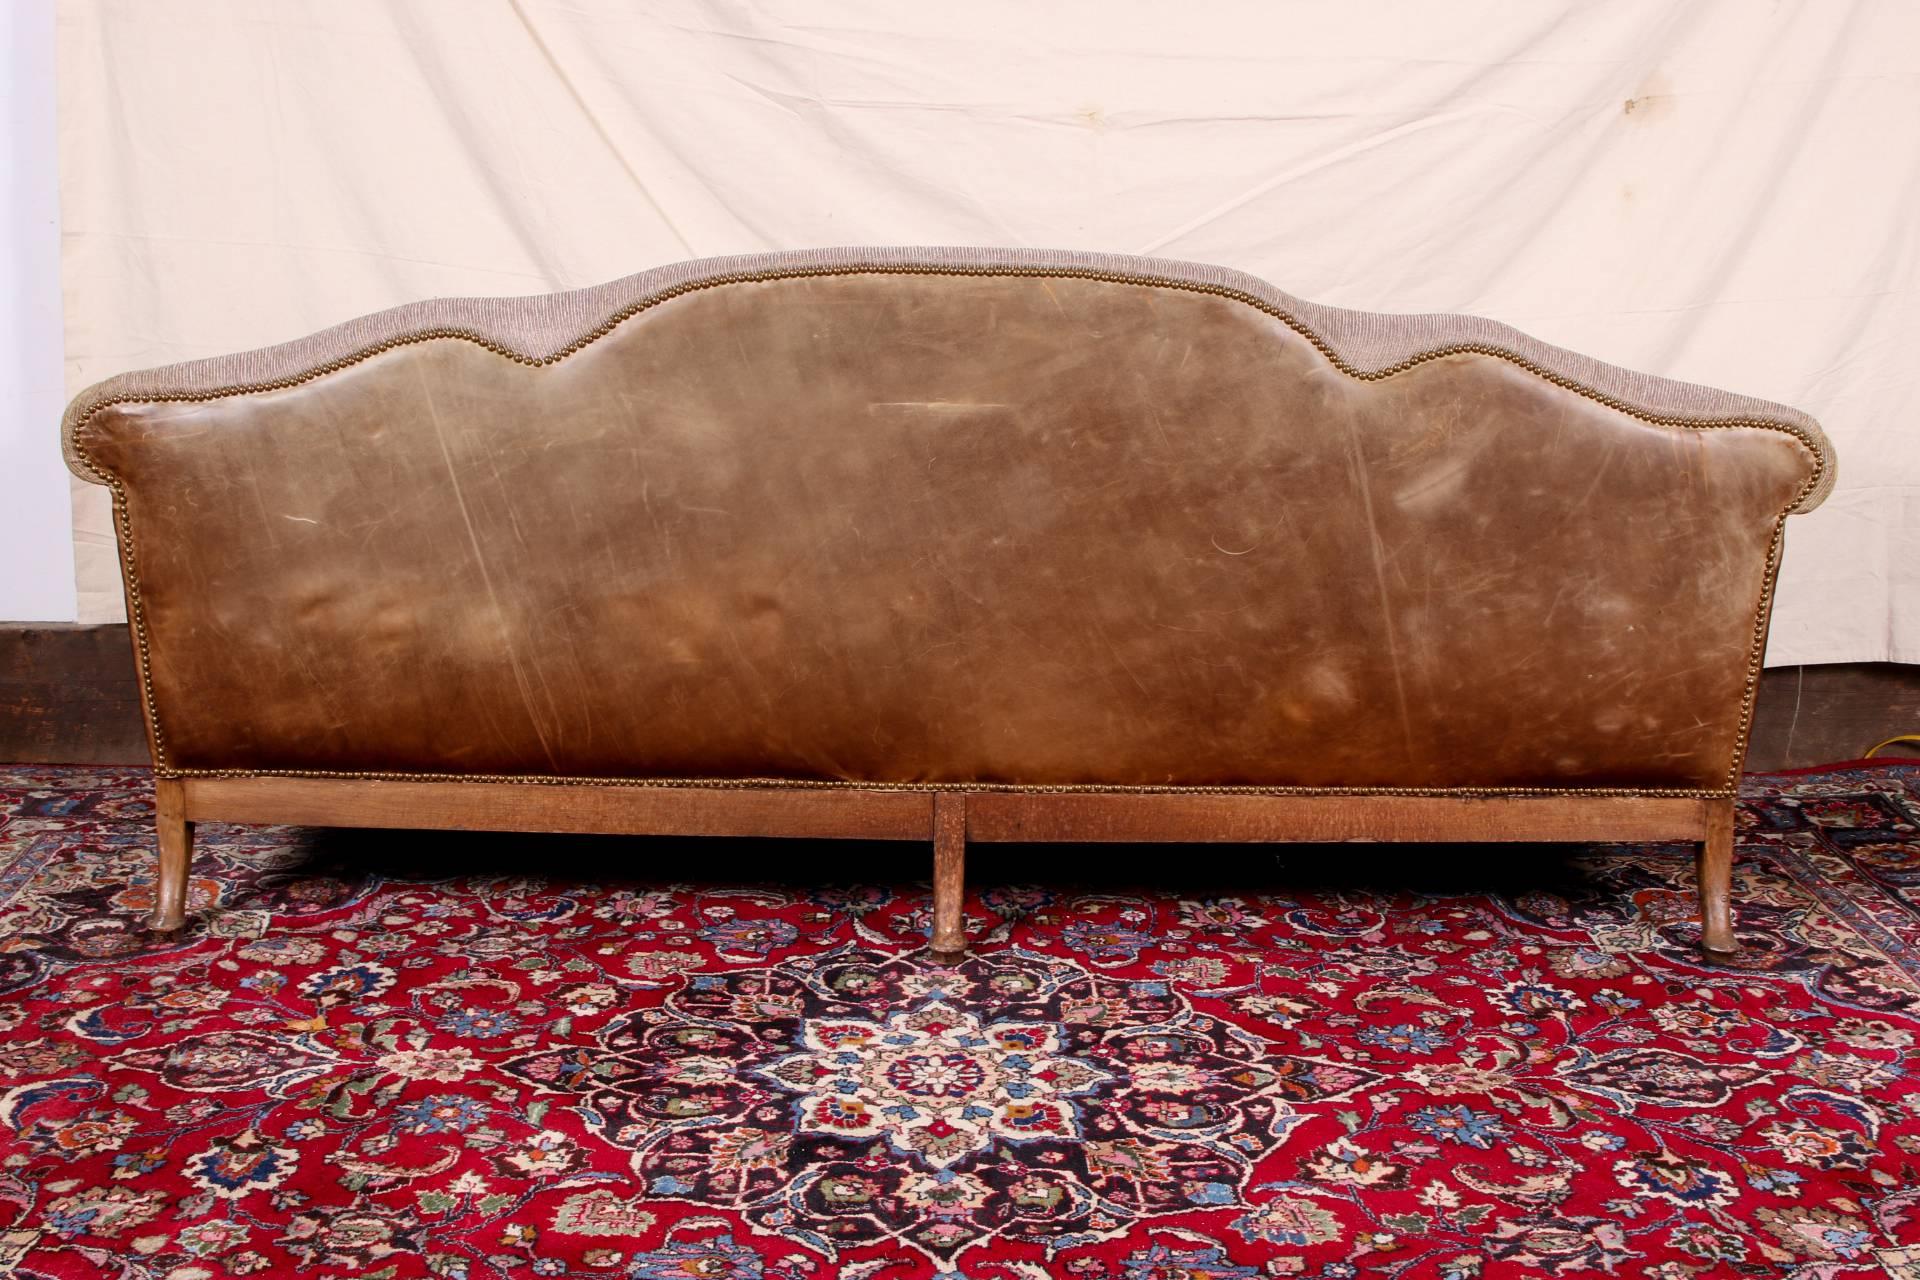 American Classical Vintage Camel Back Sofa with a Finely Carved Frame